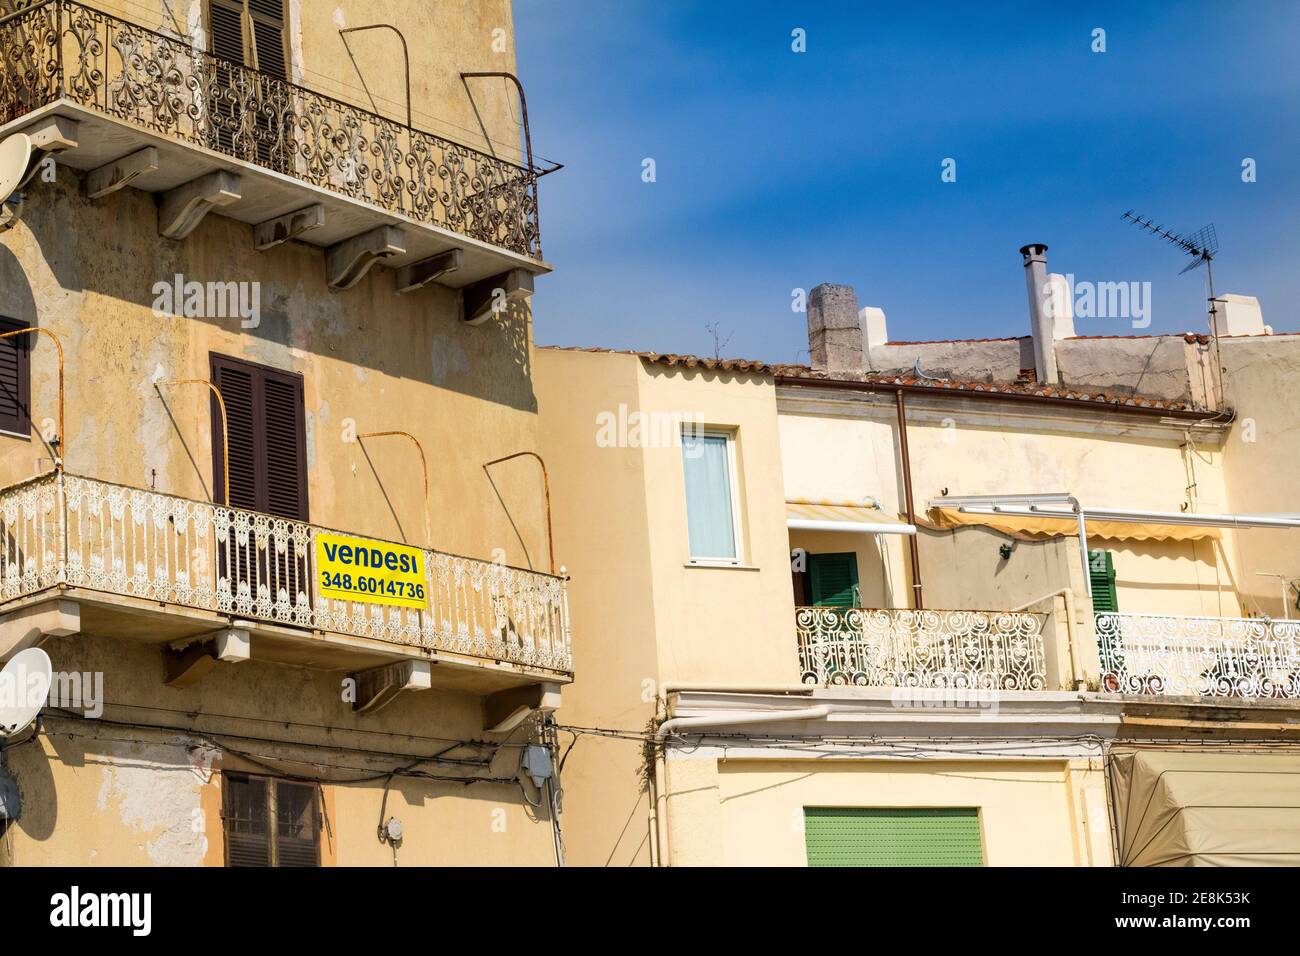 Apartment for Sale,  Exterior Image of Upper Apartments, Louvred Shutters, Building in the Main Street of La Maddalena,  Island of La Maddalena, Italy Stock Photo